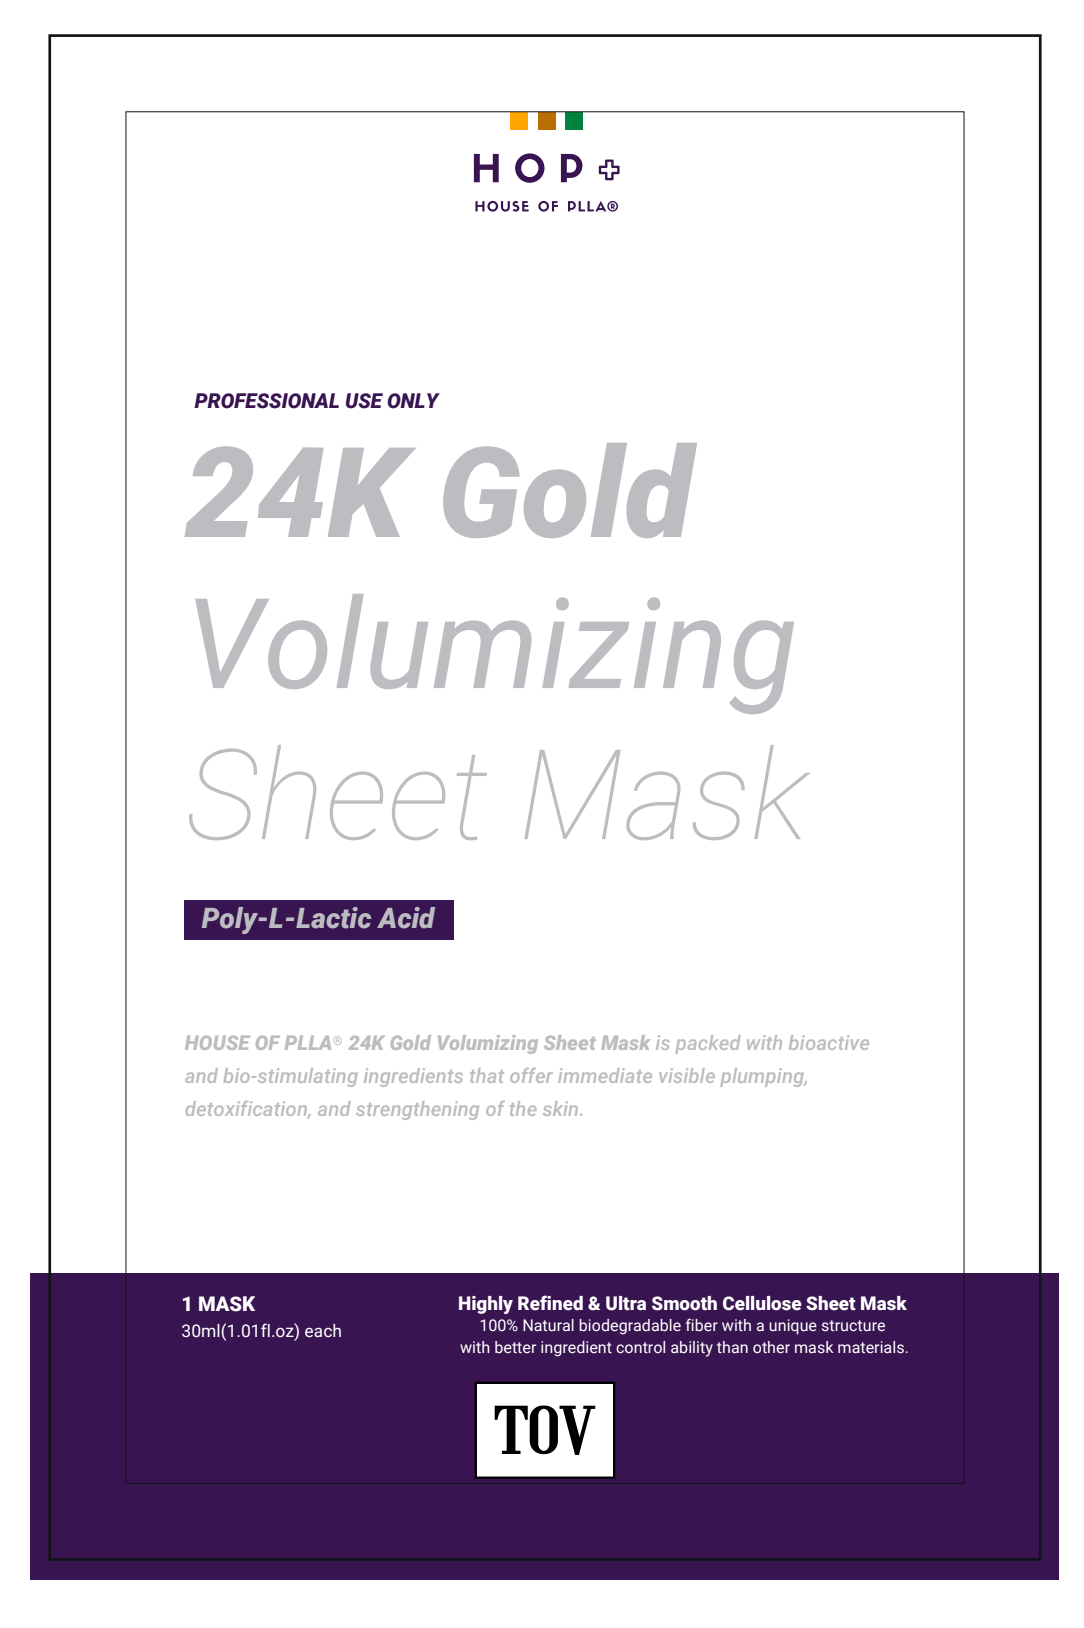 HOUSE OF PLLA®  HOP+ 24k Gold Volumizing Sheet Mask 5pc/box Retail $78 - SPECIAL OFFER